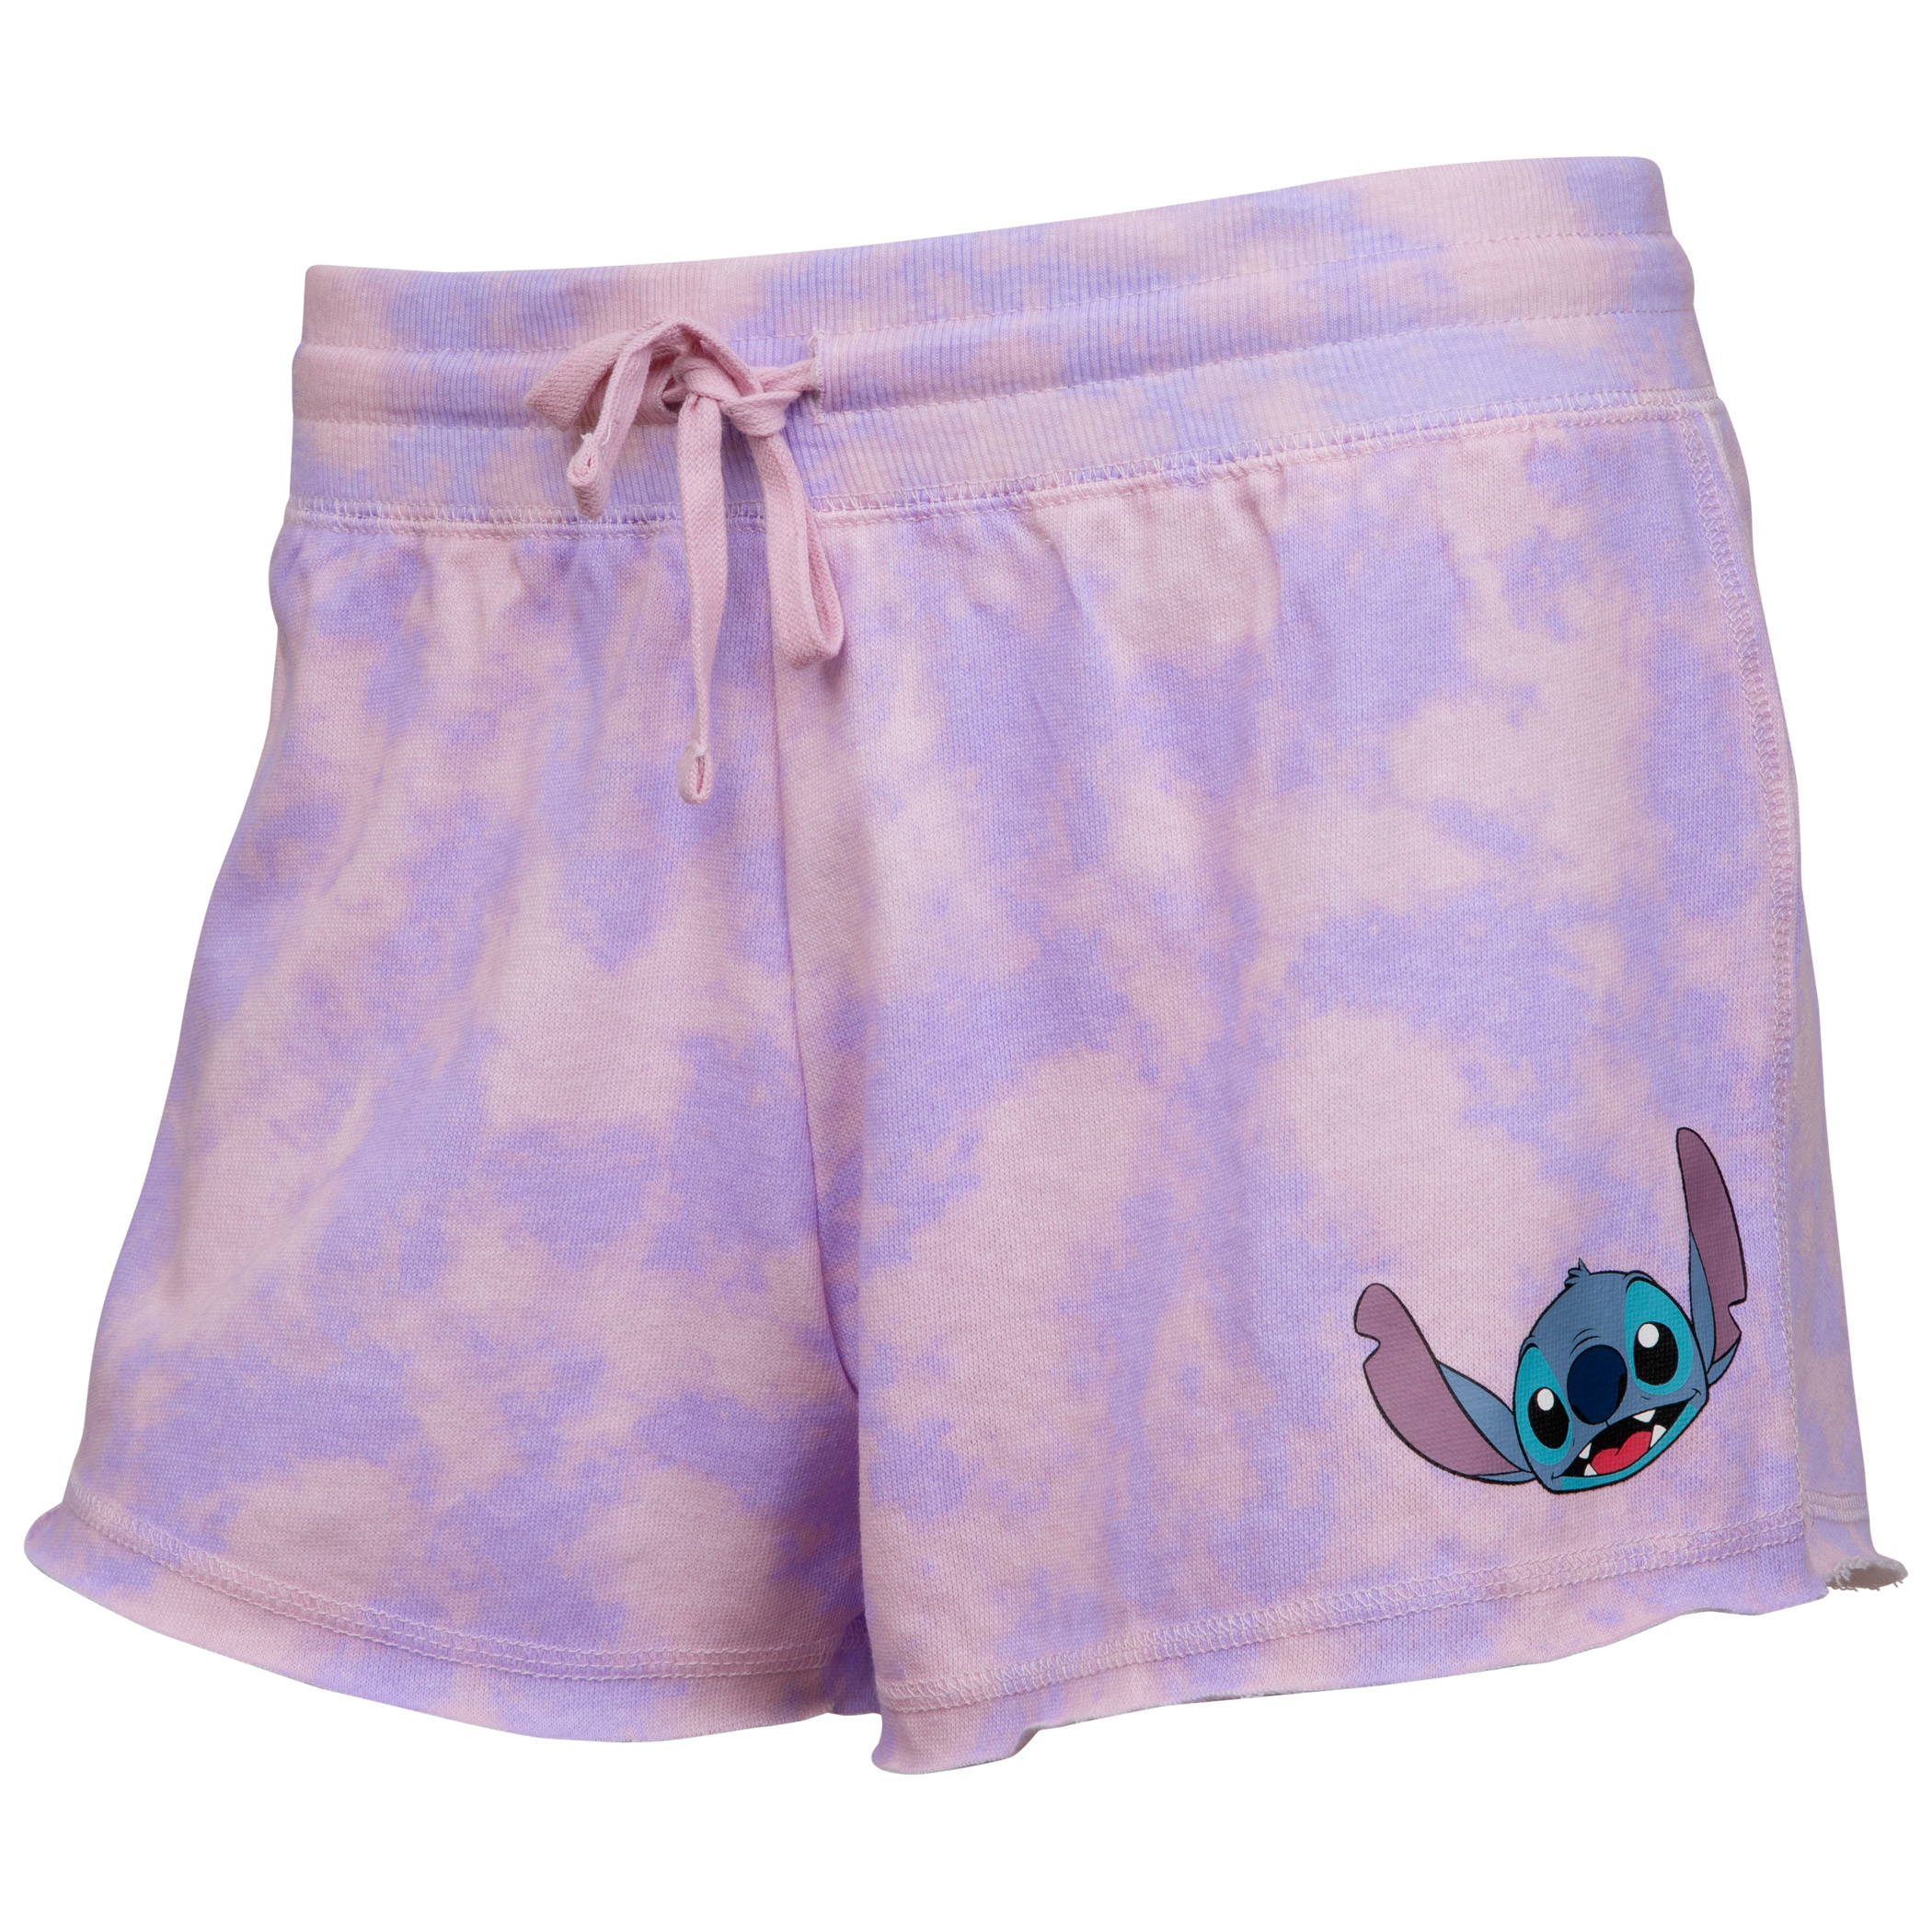 Lilo and Stitch Character Face Tie Dye Shorts